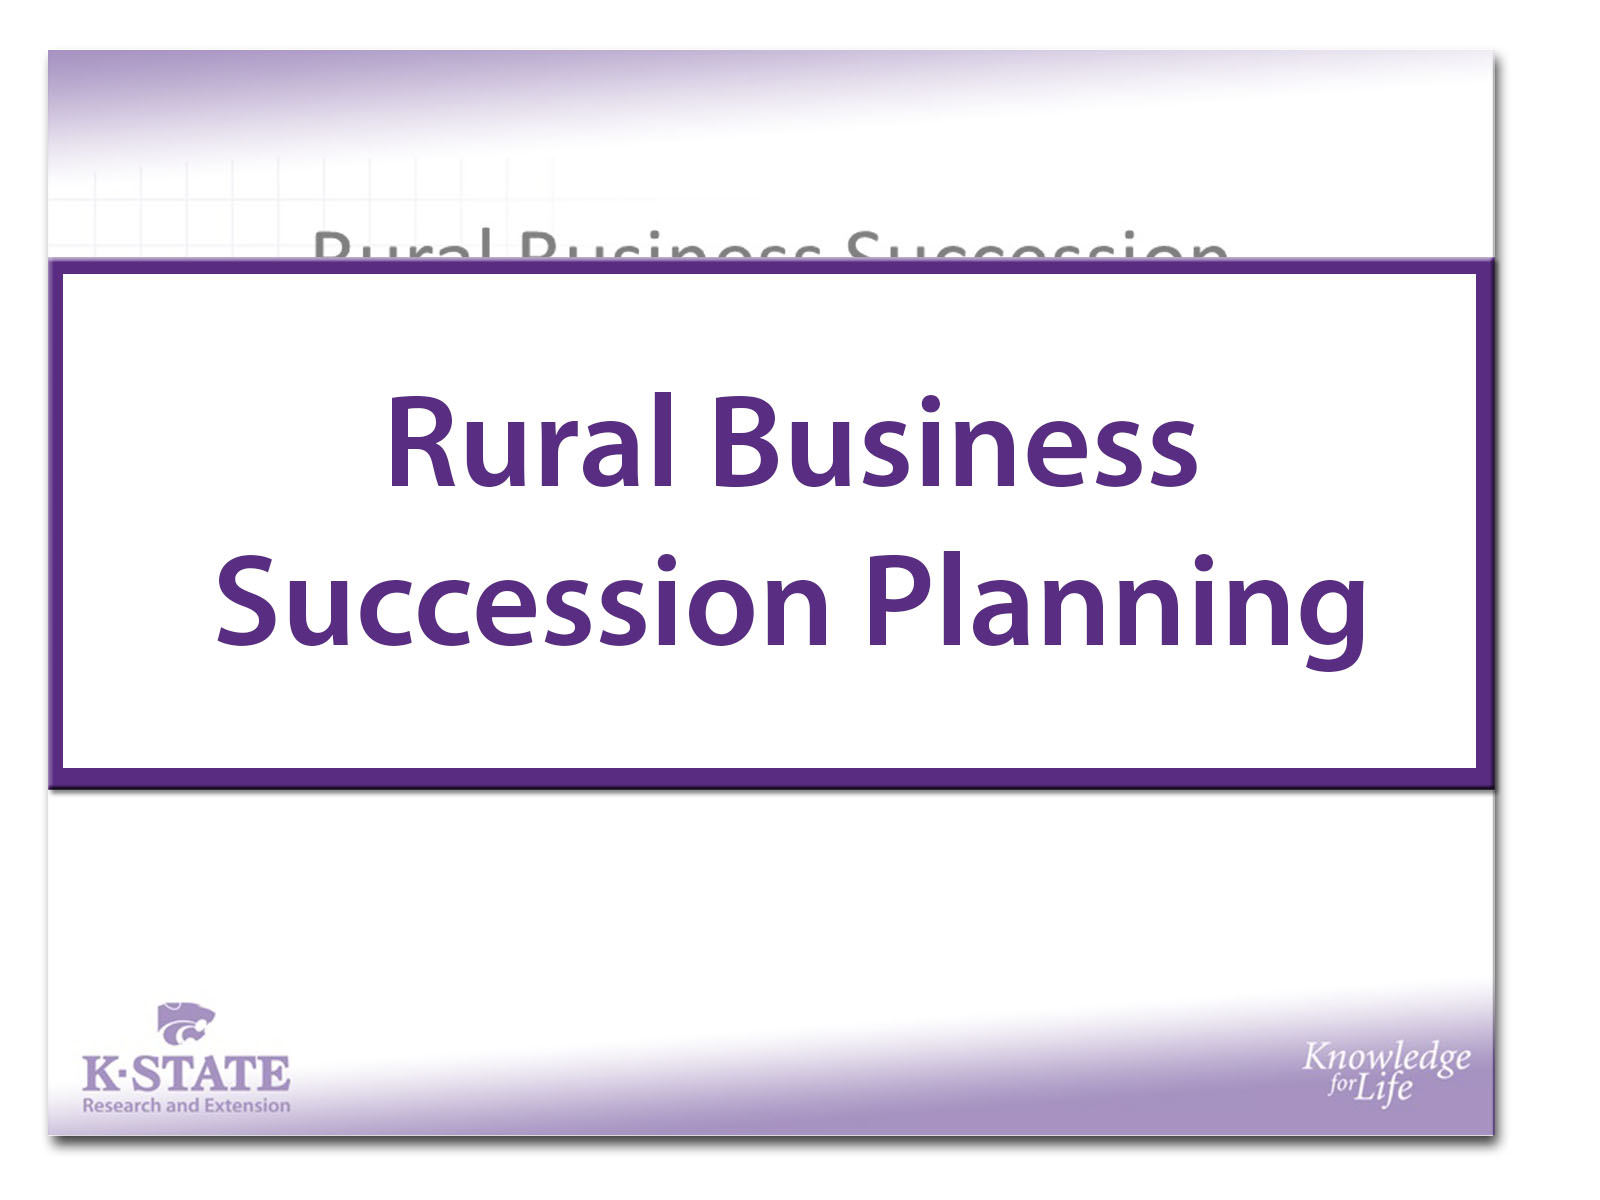 Rural Business Succession Planning